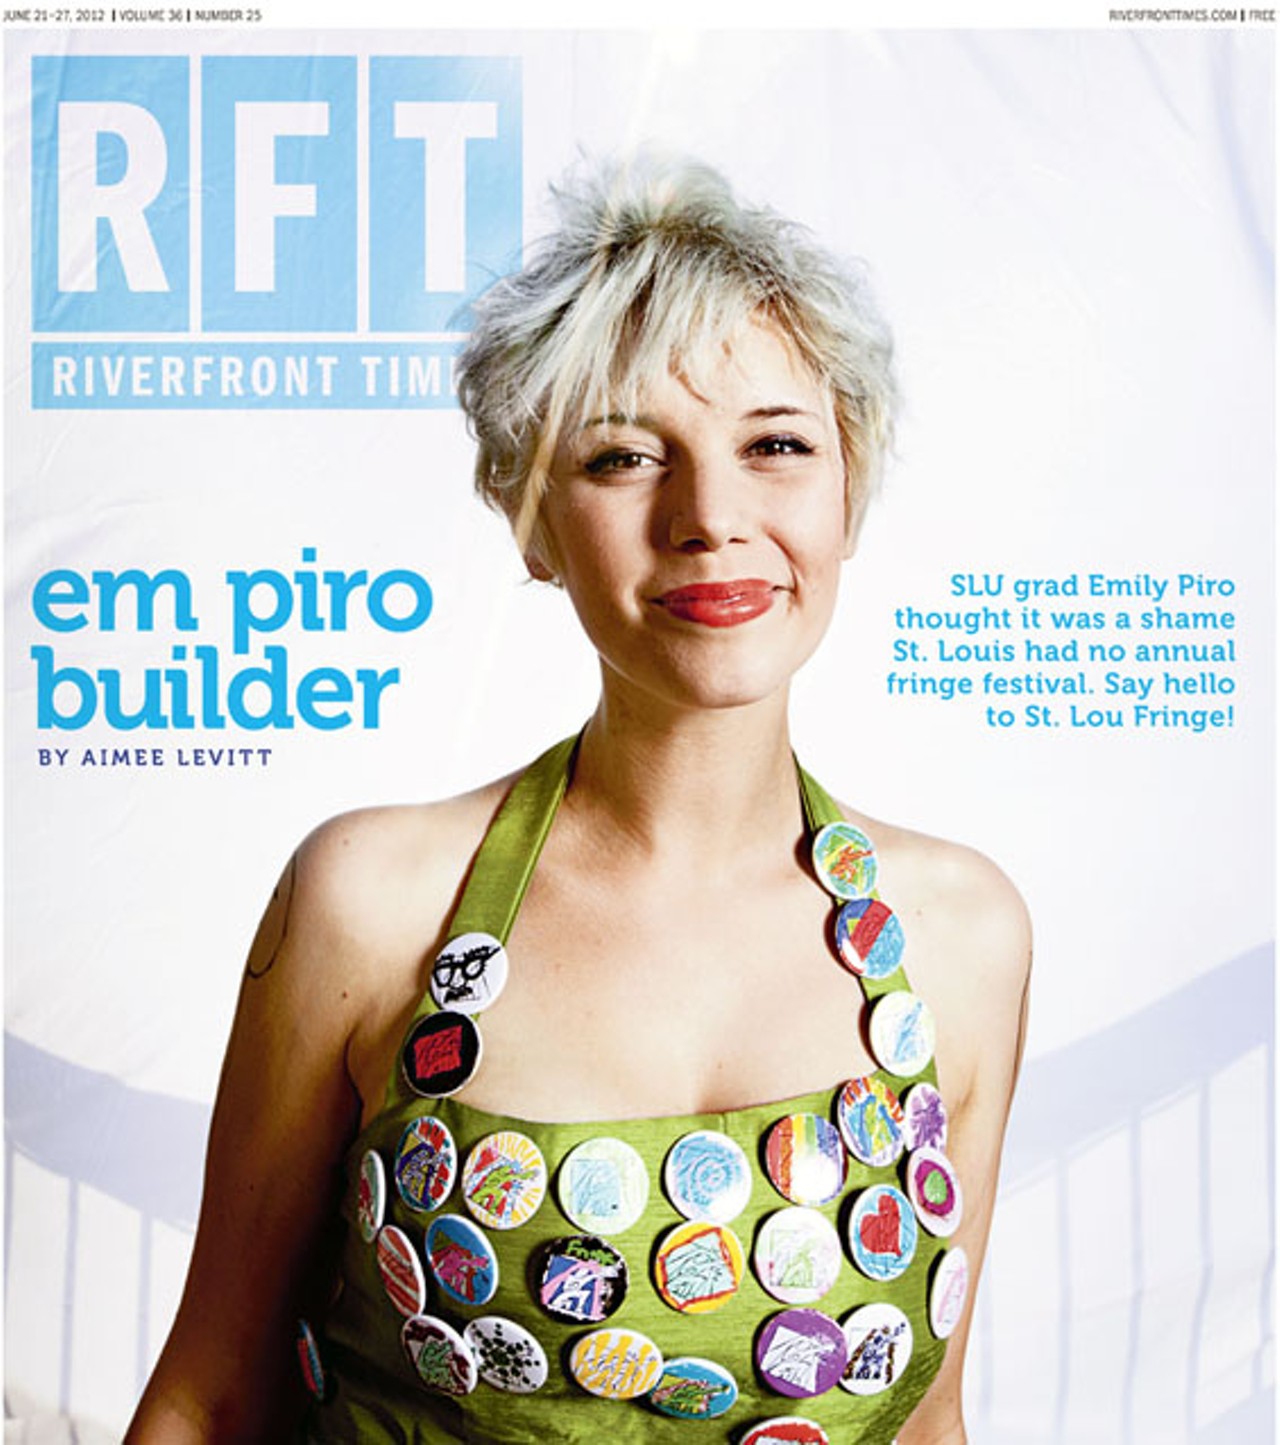 SLU grad Em Piro thought it was a shame St. Louis had no annual fringe festival. Say hello to St. Lou Fringe! By Aimee Levitt in the June 21 issue. Cover: Photo by Jennifer Silverberg.